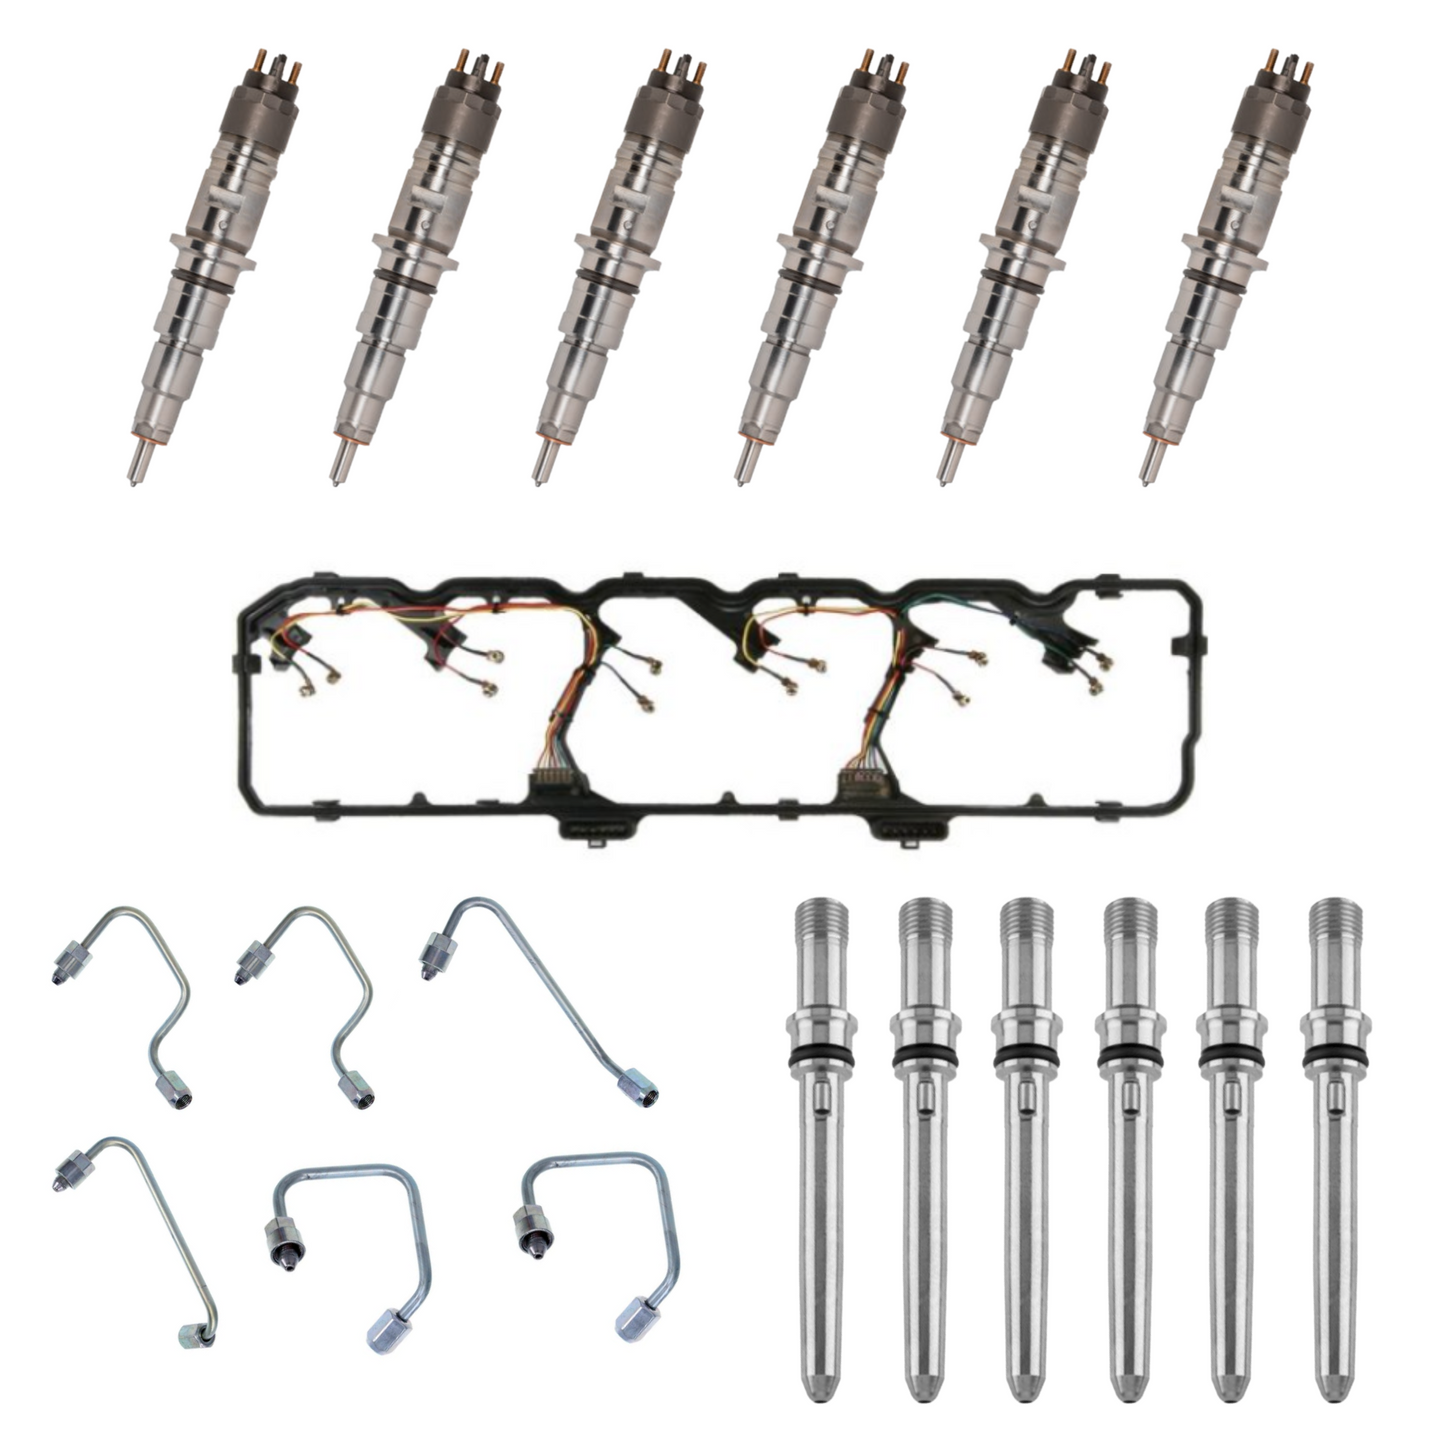 2007-2012 6.7 Cummins Injector Replacement Kit - Remanufactured